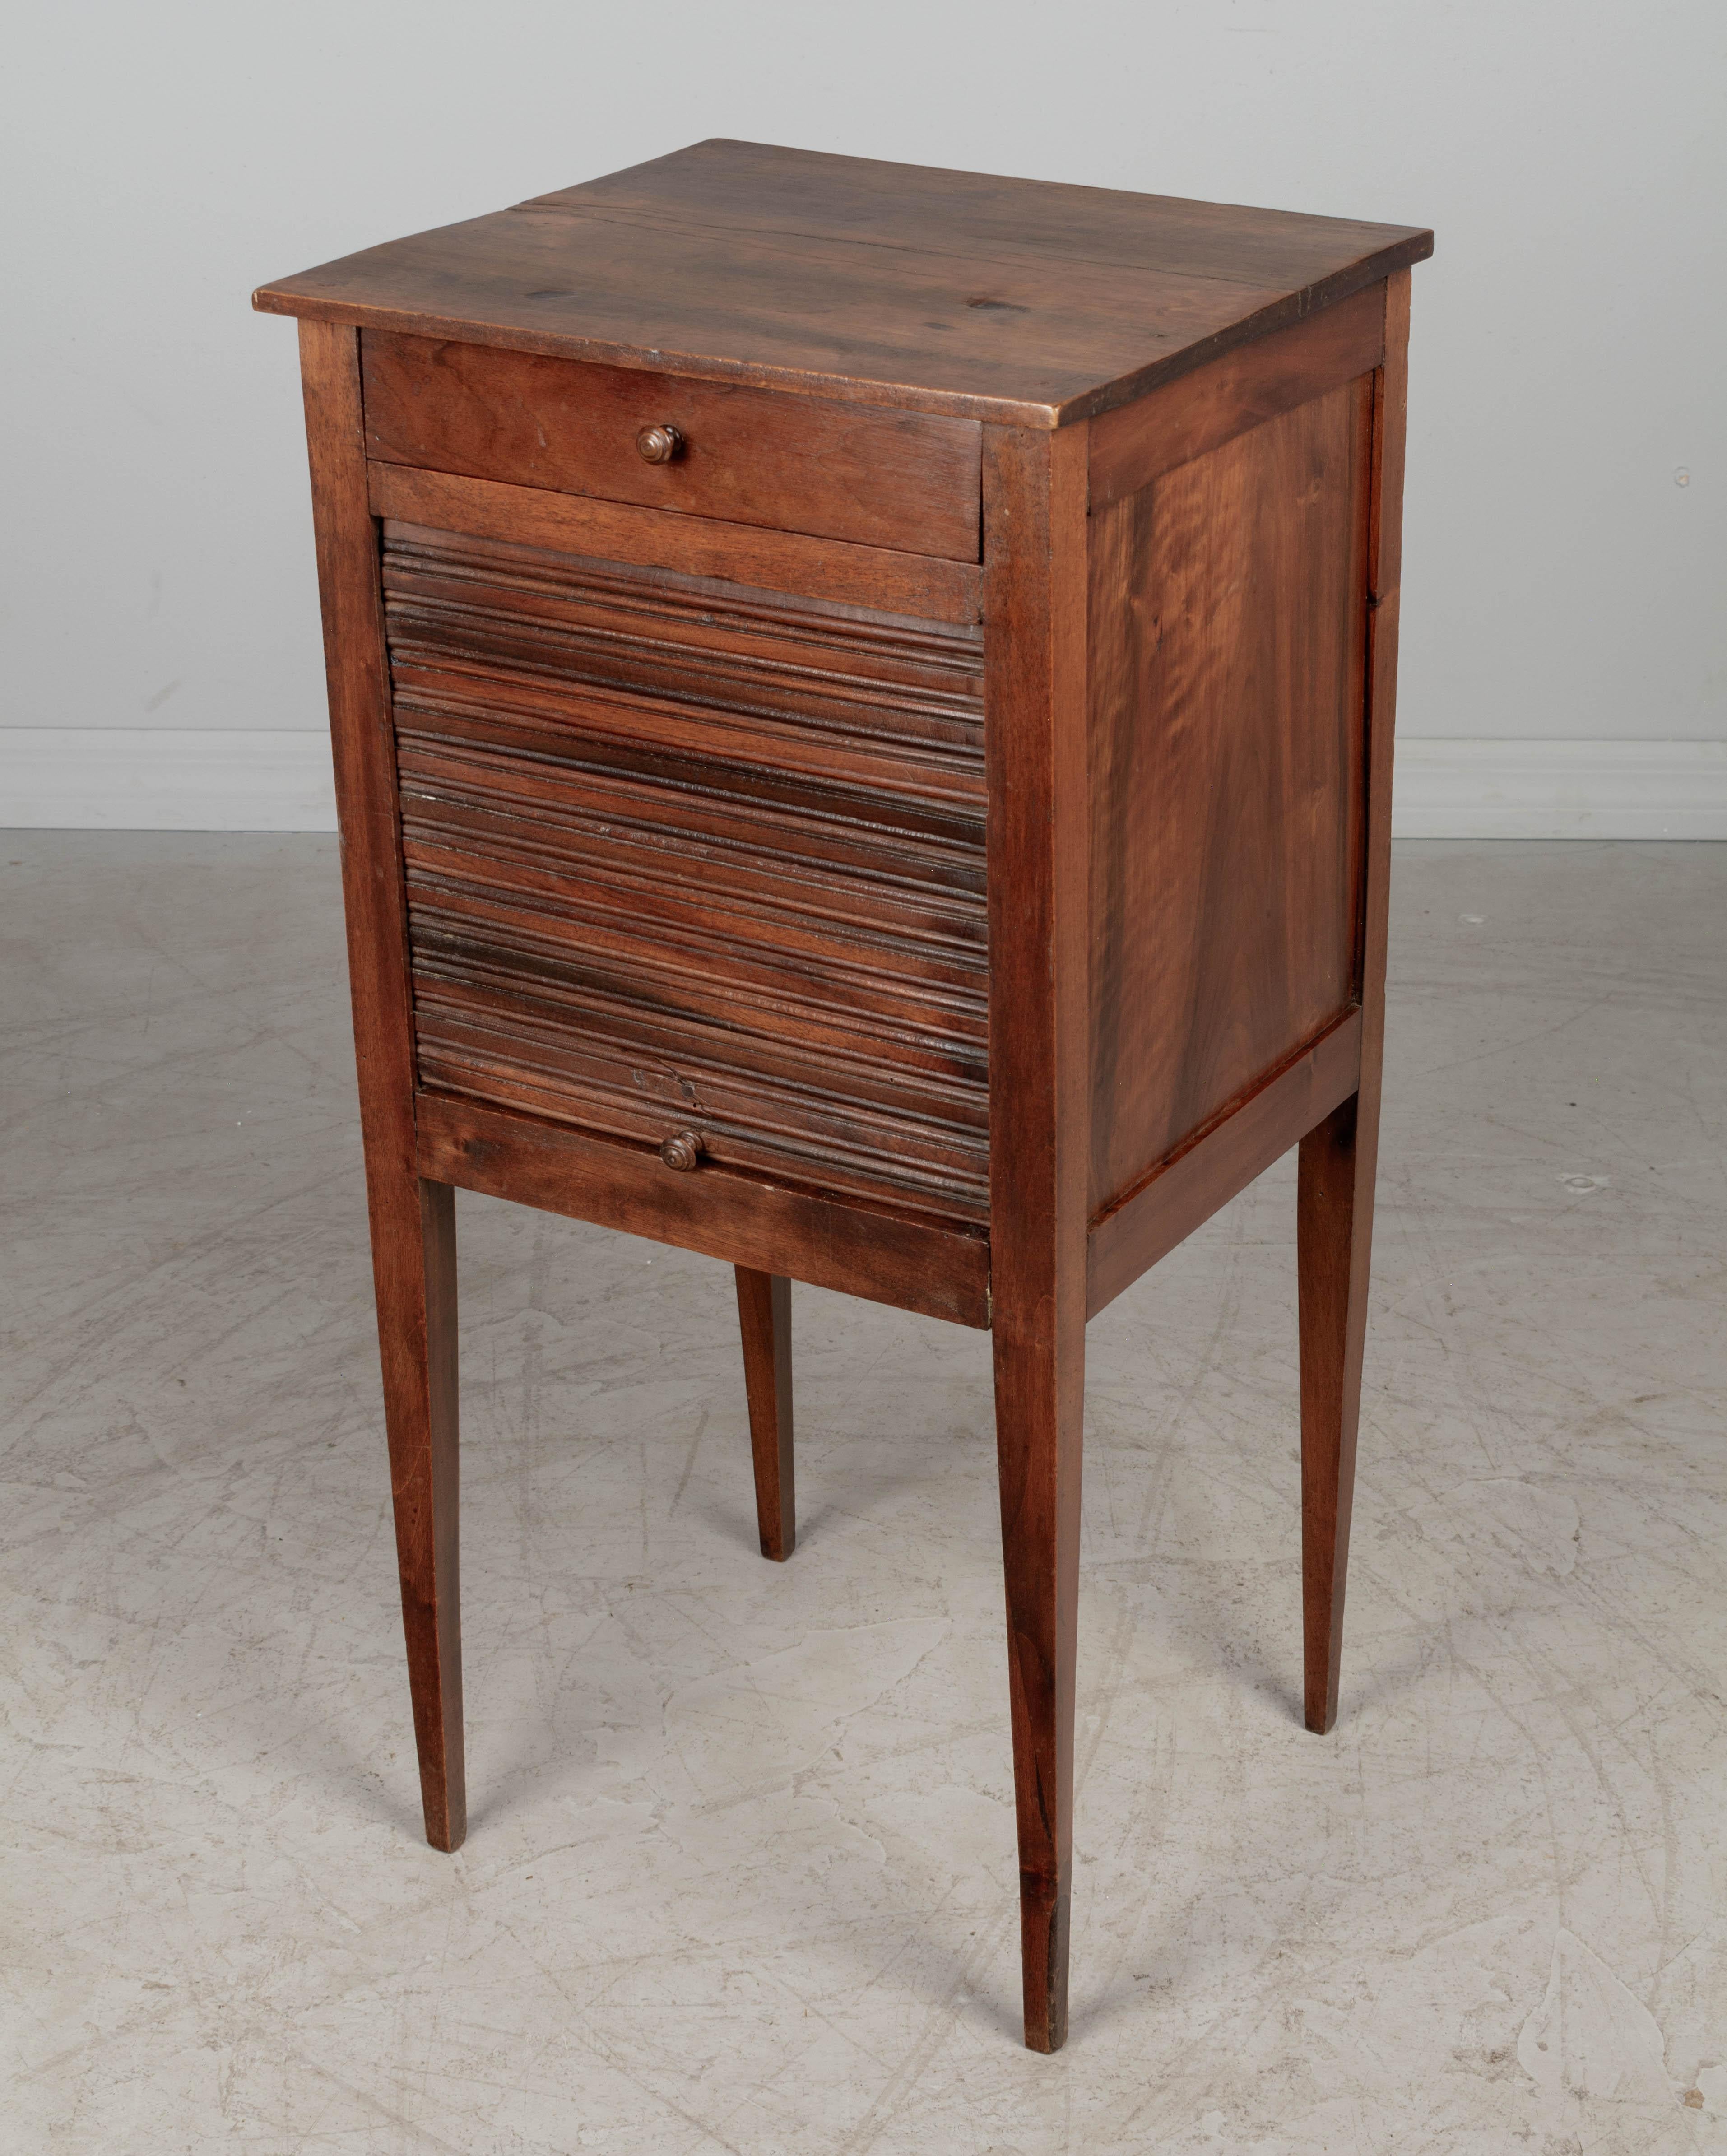 French Country Walnut Side Table with Tamboor Door In Good Condition For Sale In Winter Park, FL